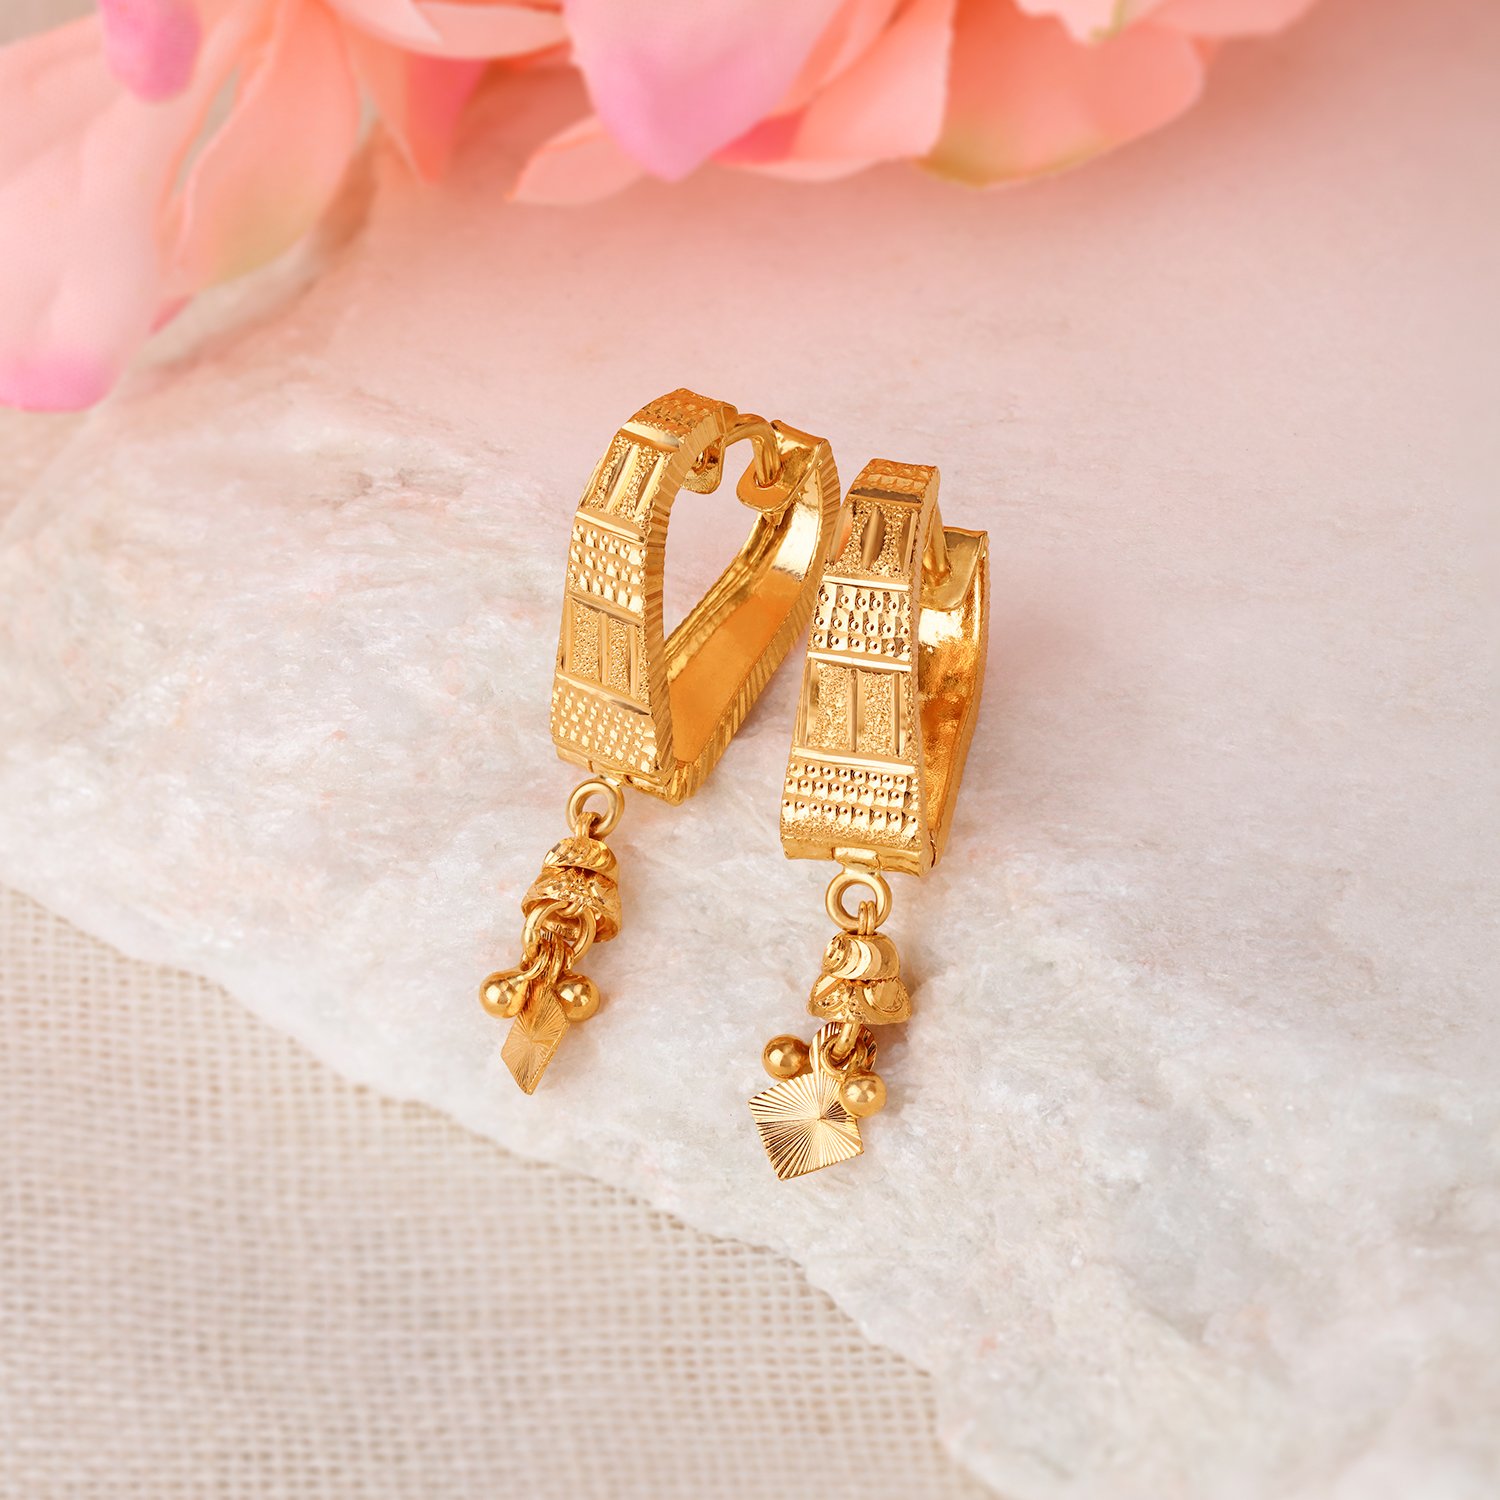 Mia by Tanishq 14KT Yellow Gold Stud Earrings with Triangle Design-hoanganhbinhduong.edu.vn